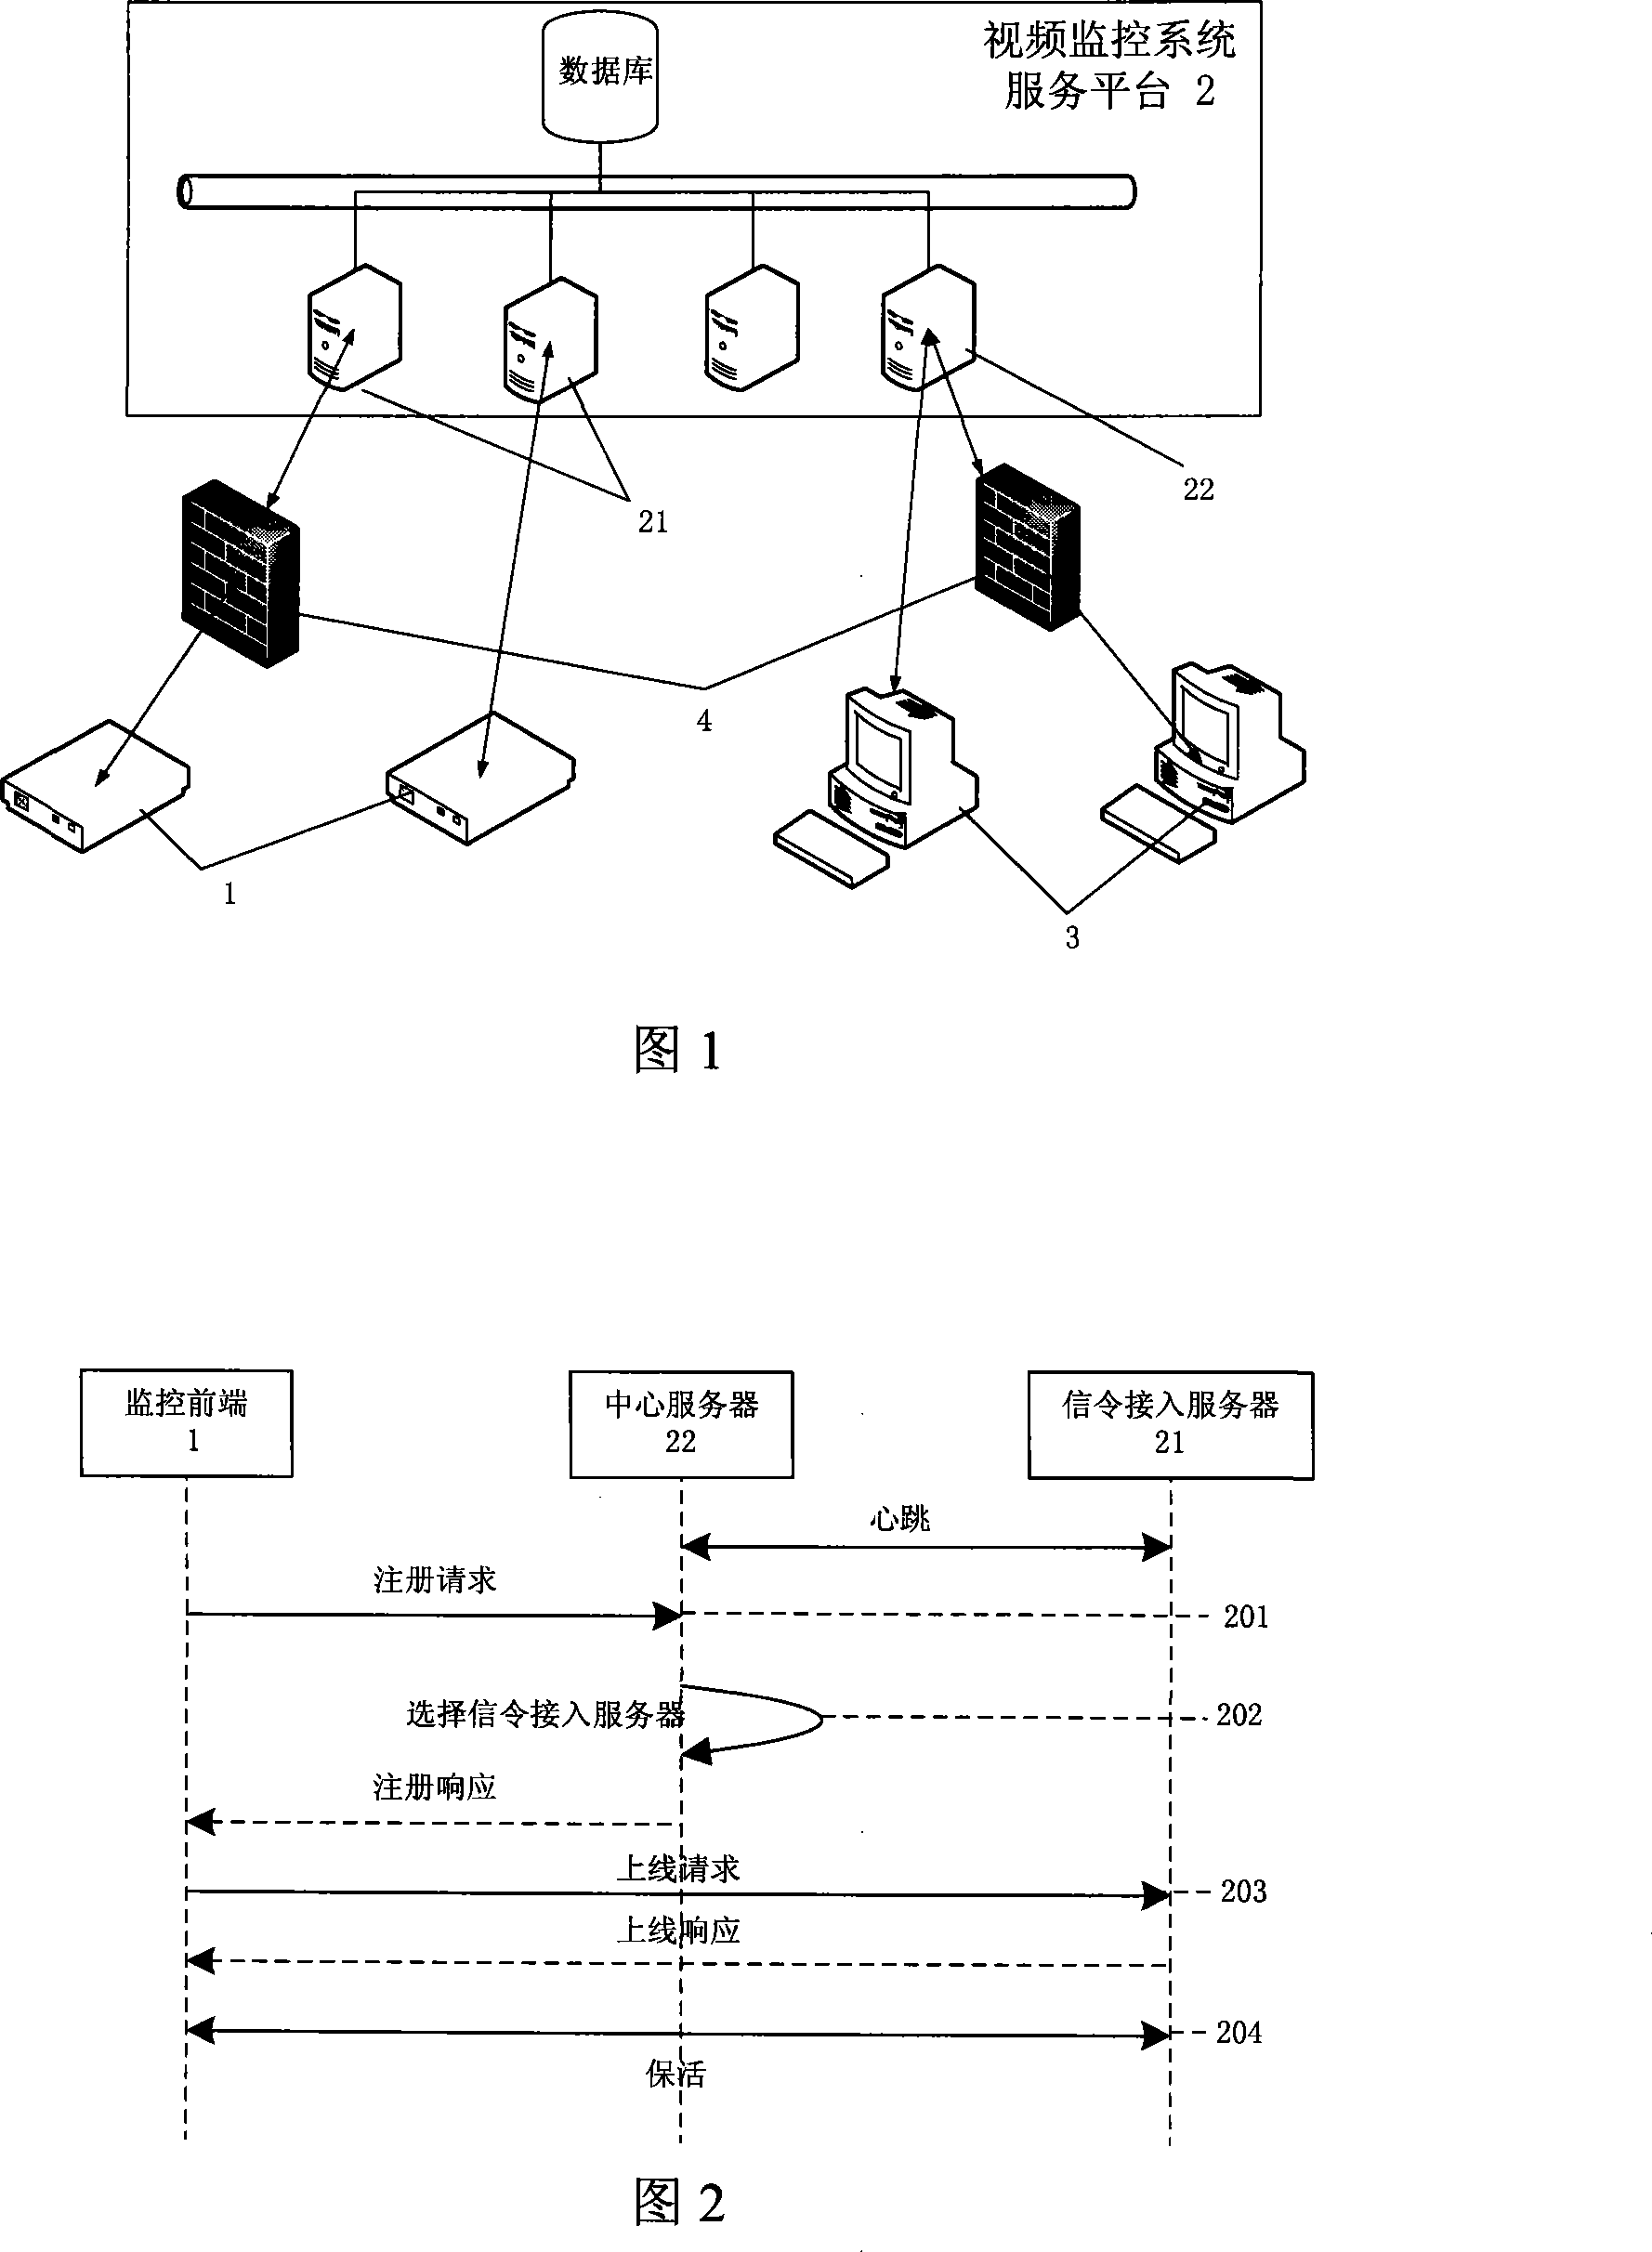 Control protocol and corresponding remote video supervisory control system